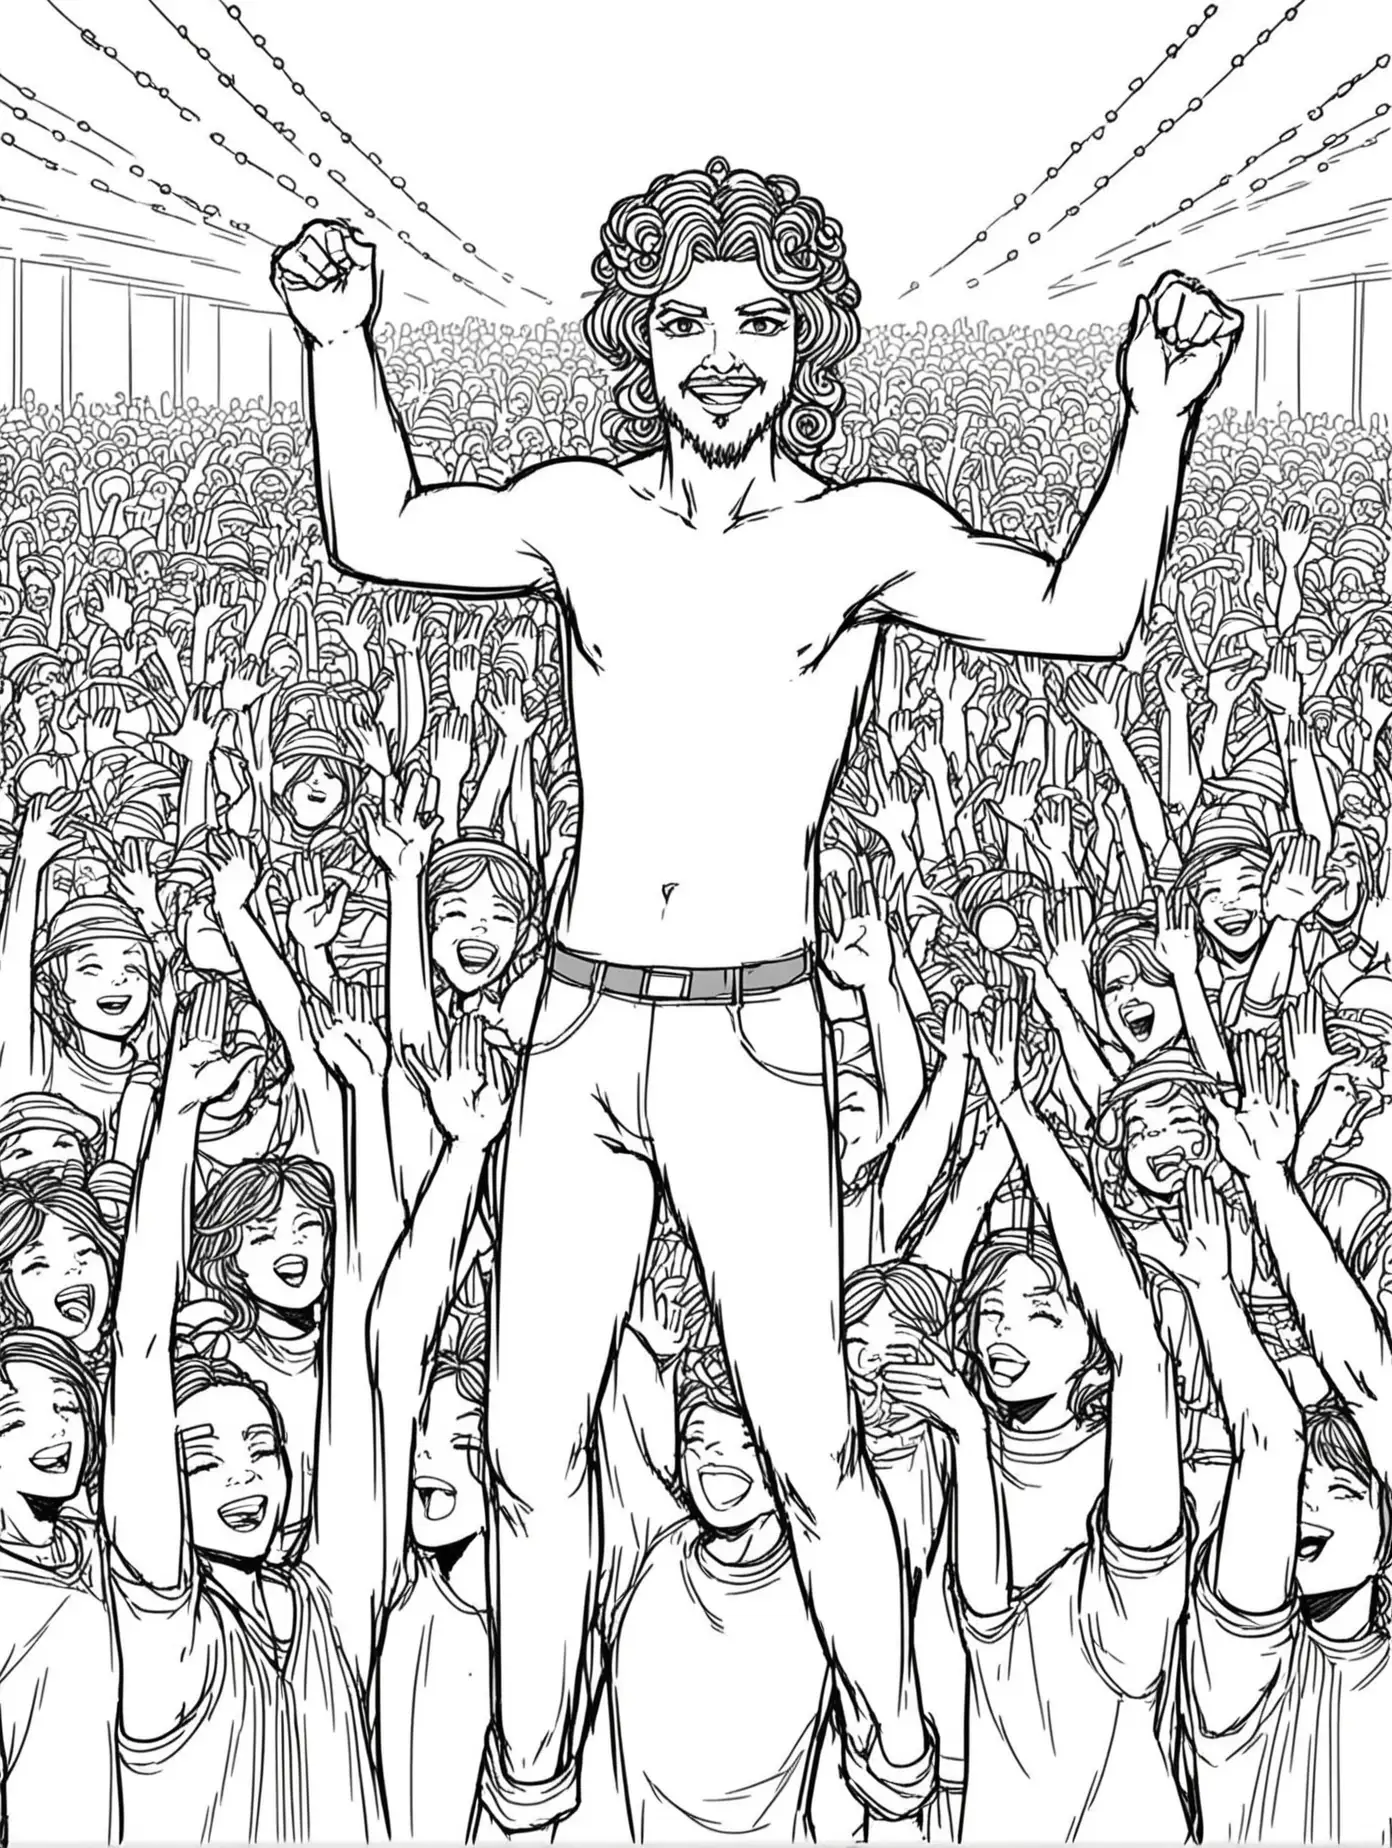 Create a simple, minimalistic coloring page featuring Dionysus clubbing at the techno party dancing in a crowd
. Aim for simplicity and clean lines, making this coloring page an appealing and easy to color design for children aged 4